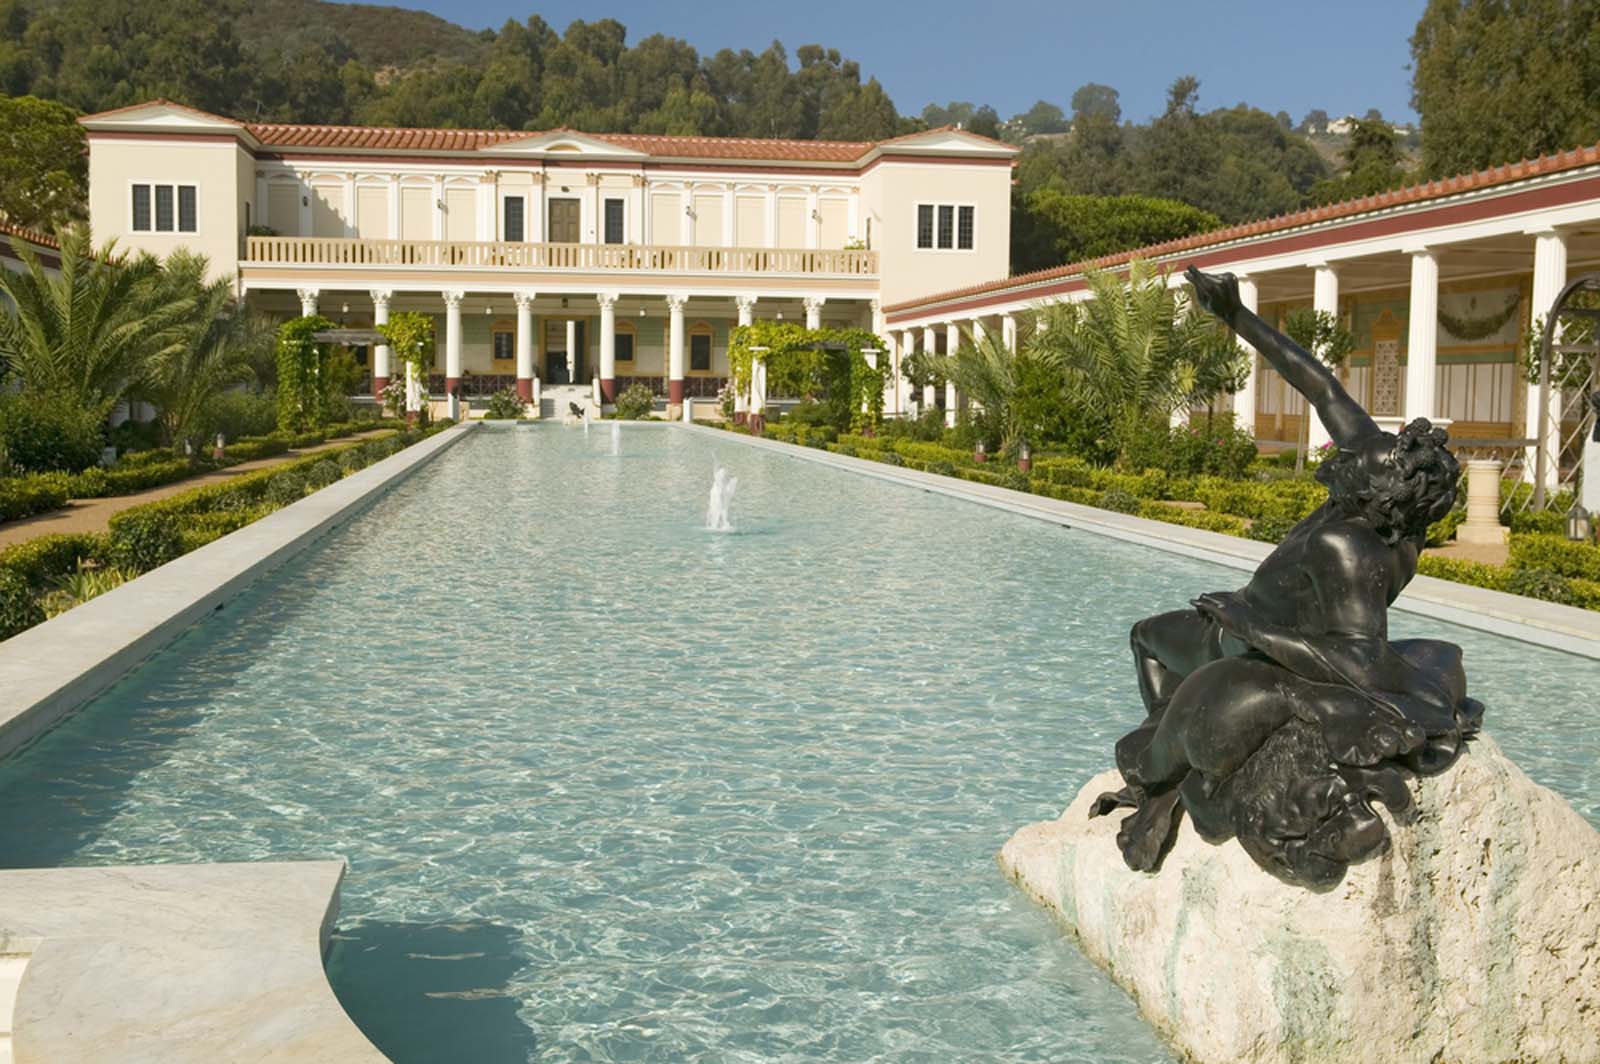 best things to do in malibu Getty museum